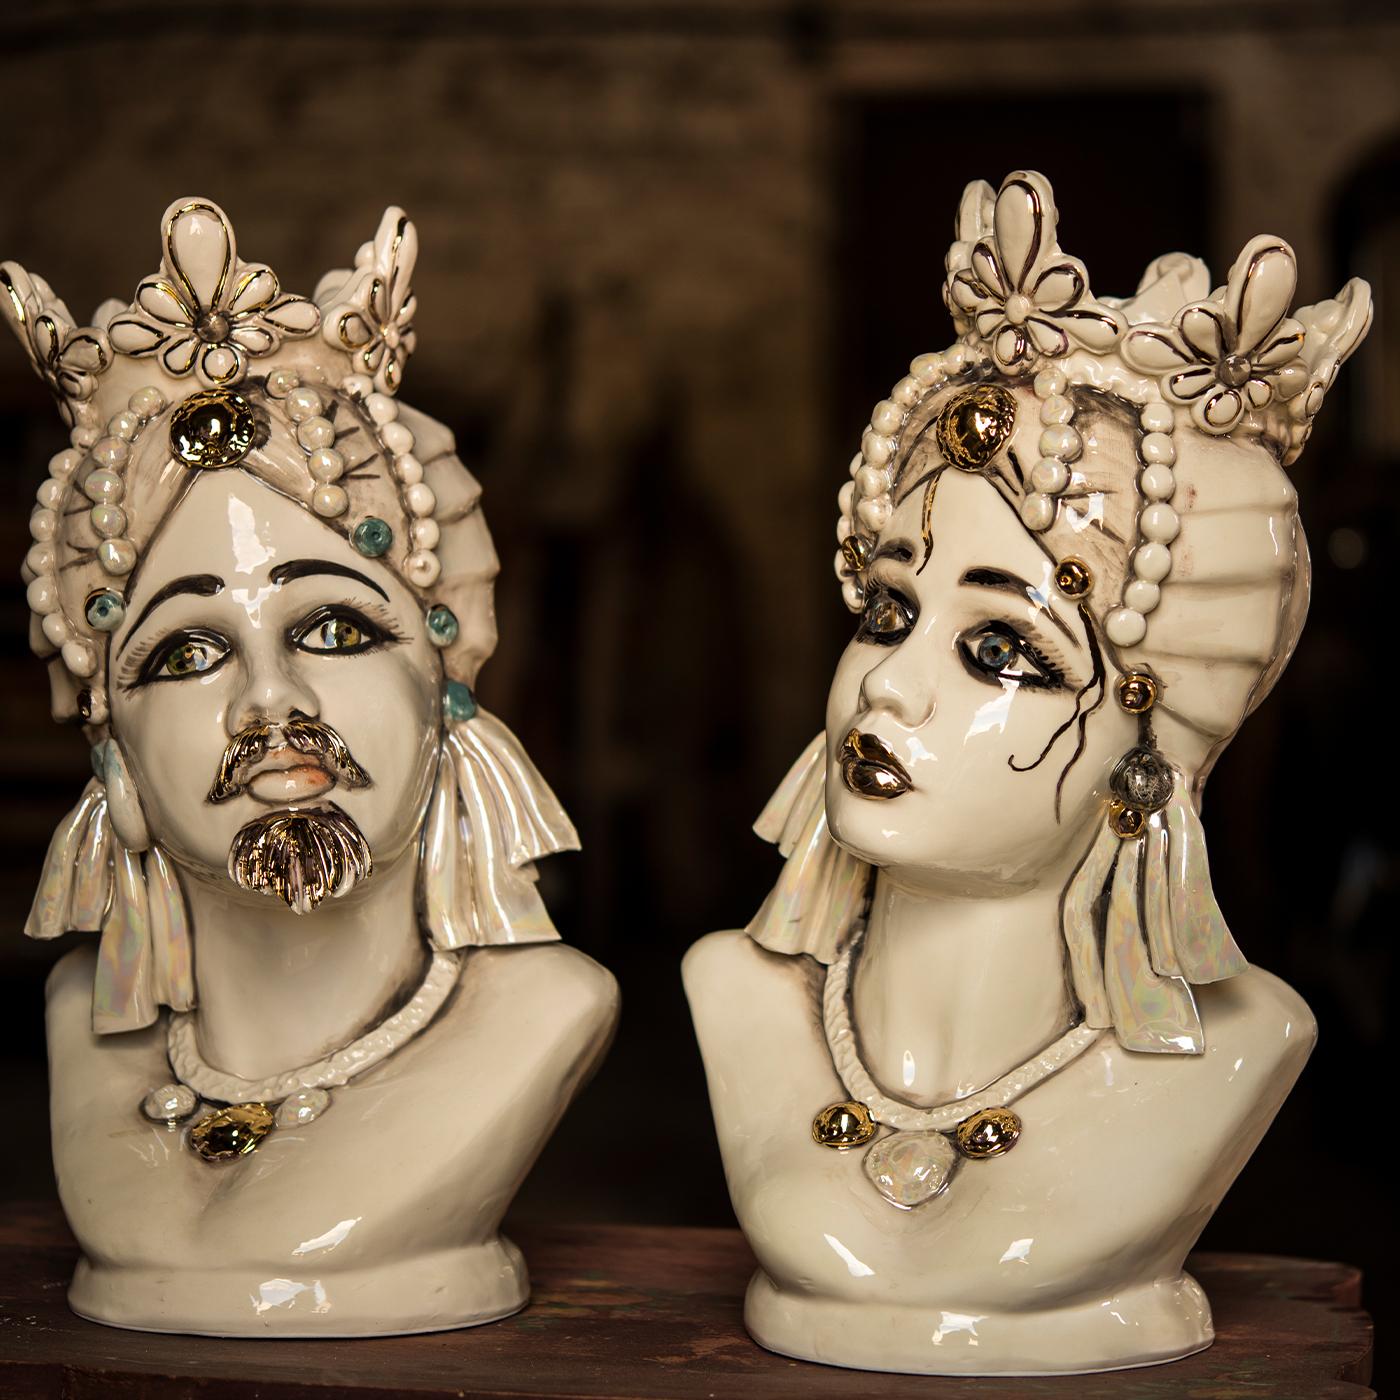 The Moor's head vase is an iconic Sicilian ceramic inspired by a legend of love and revenge between a Moor and a maiden which dates back to the period of the Arab occupation in Sicily. This exquisite modern interpretation of the traditional Sicilian